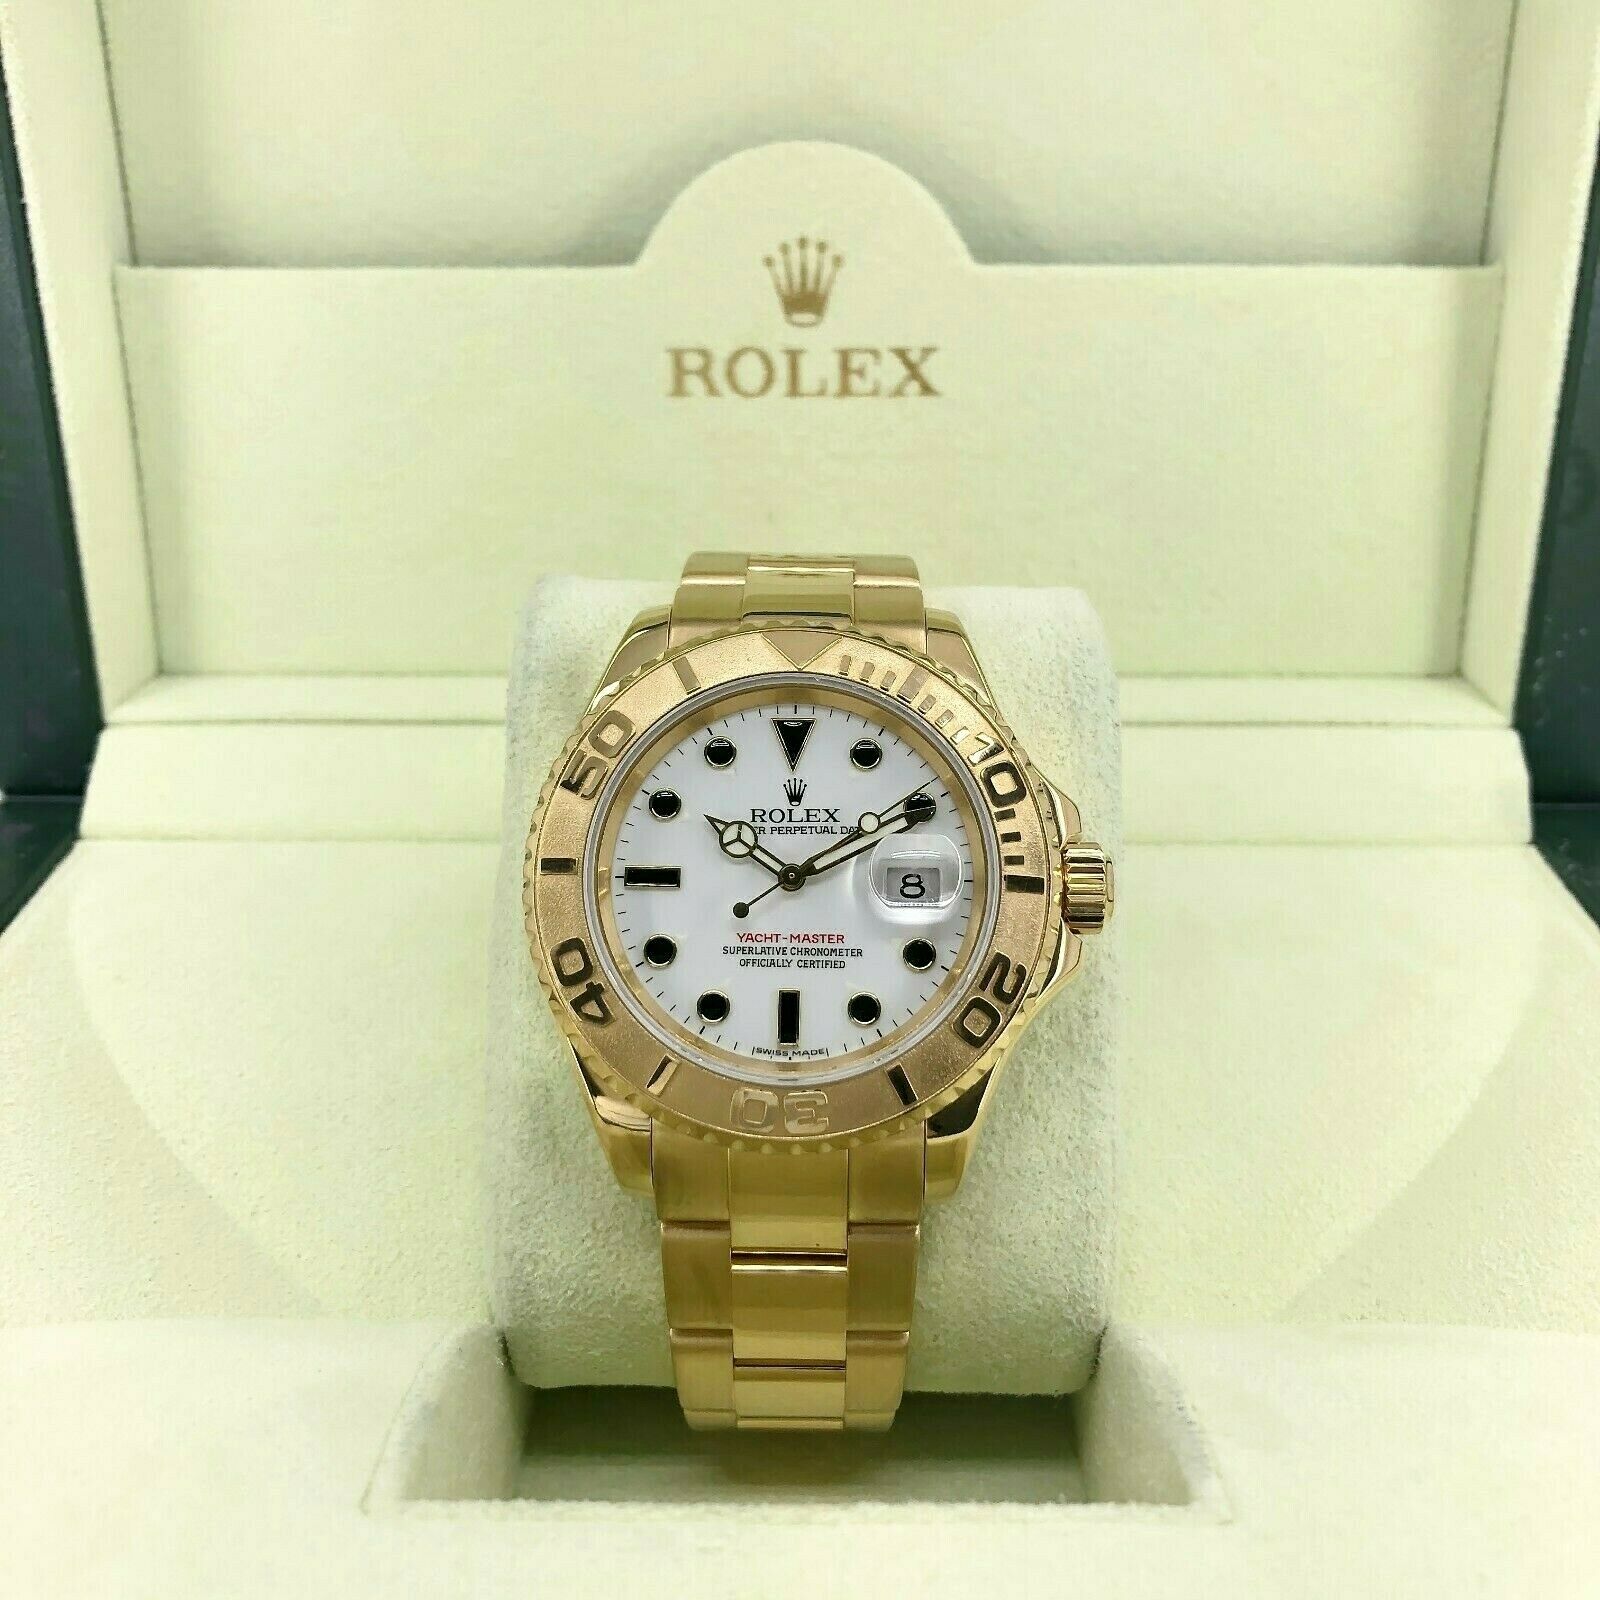 Rolex Yachtmaster 18K Yellow Gold Dial Watch